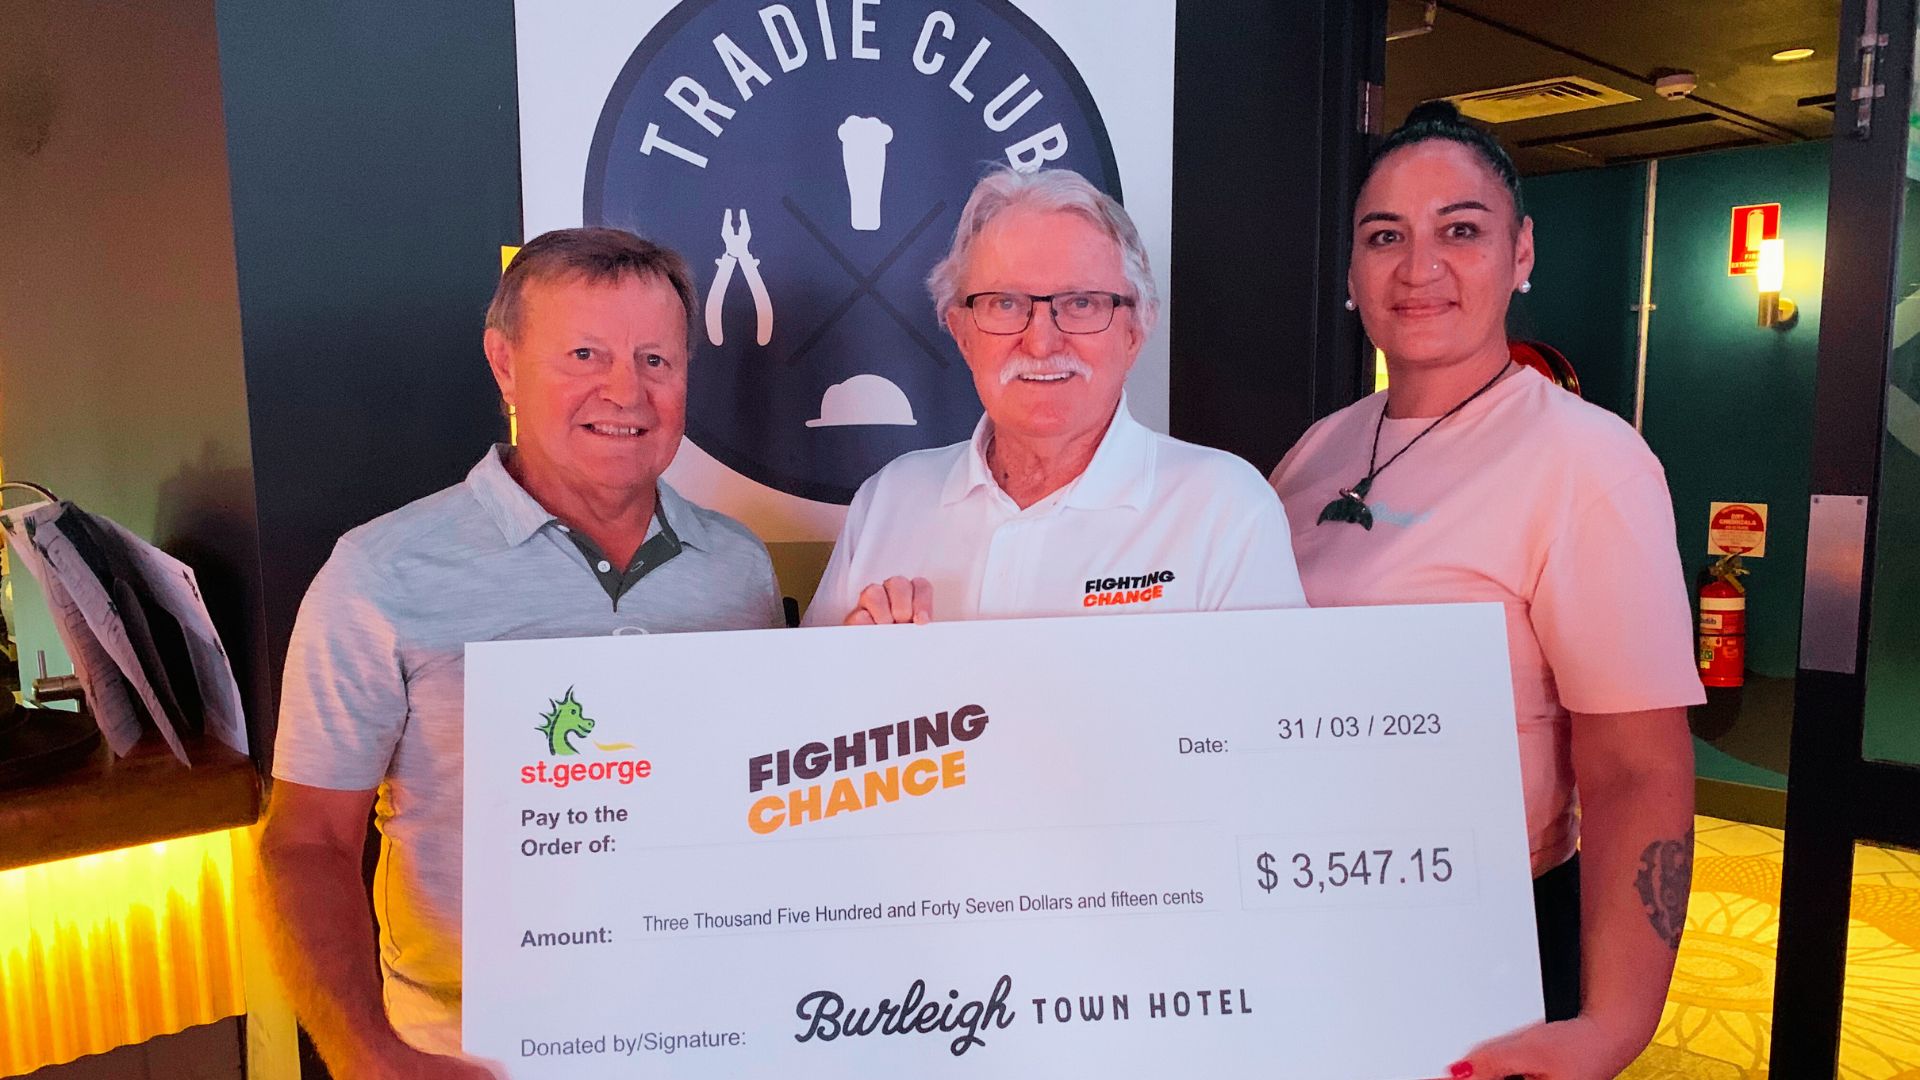 Burleigh Town Hotel makes generous donation to Fighting Chance